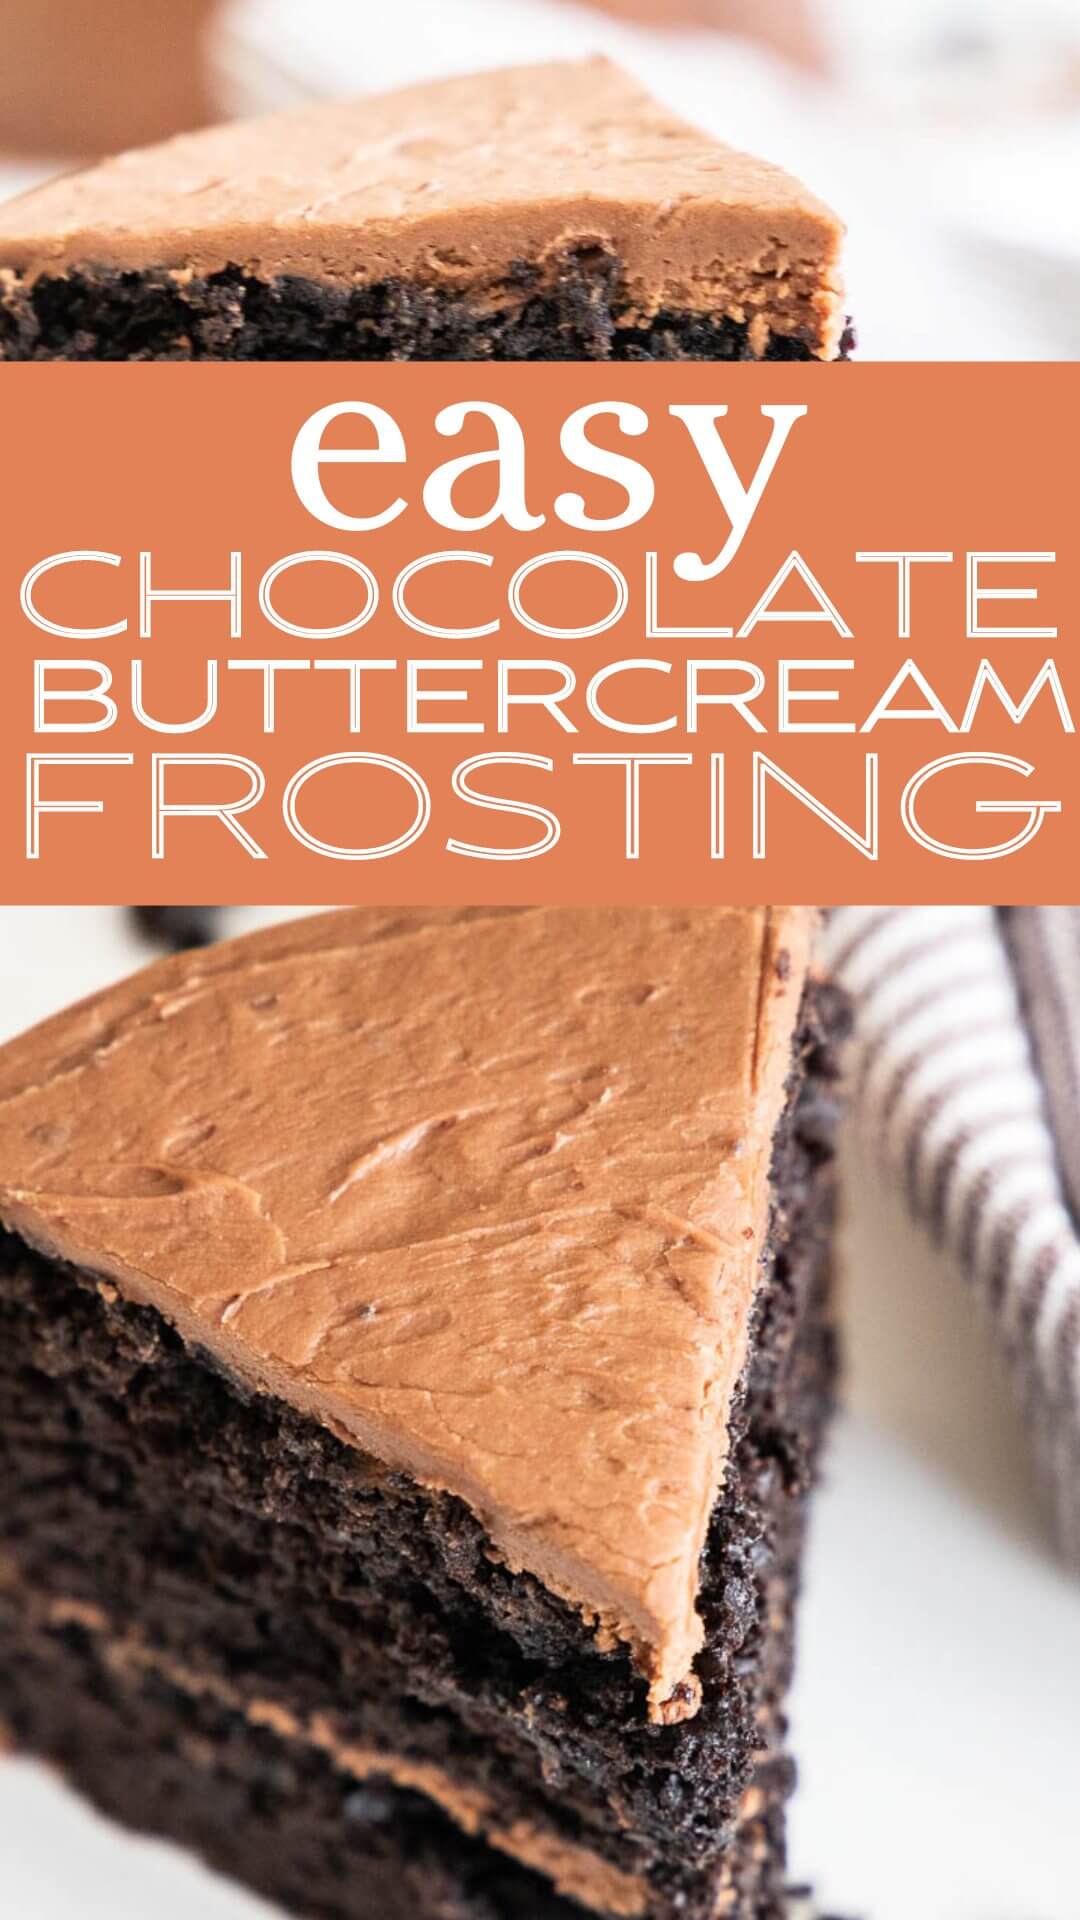 This incredibly easy chocolate buttercream frosting recipe is the perfect frosting to have on hand. Easy to make and the flavor is amazing